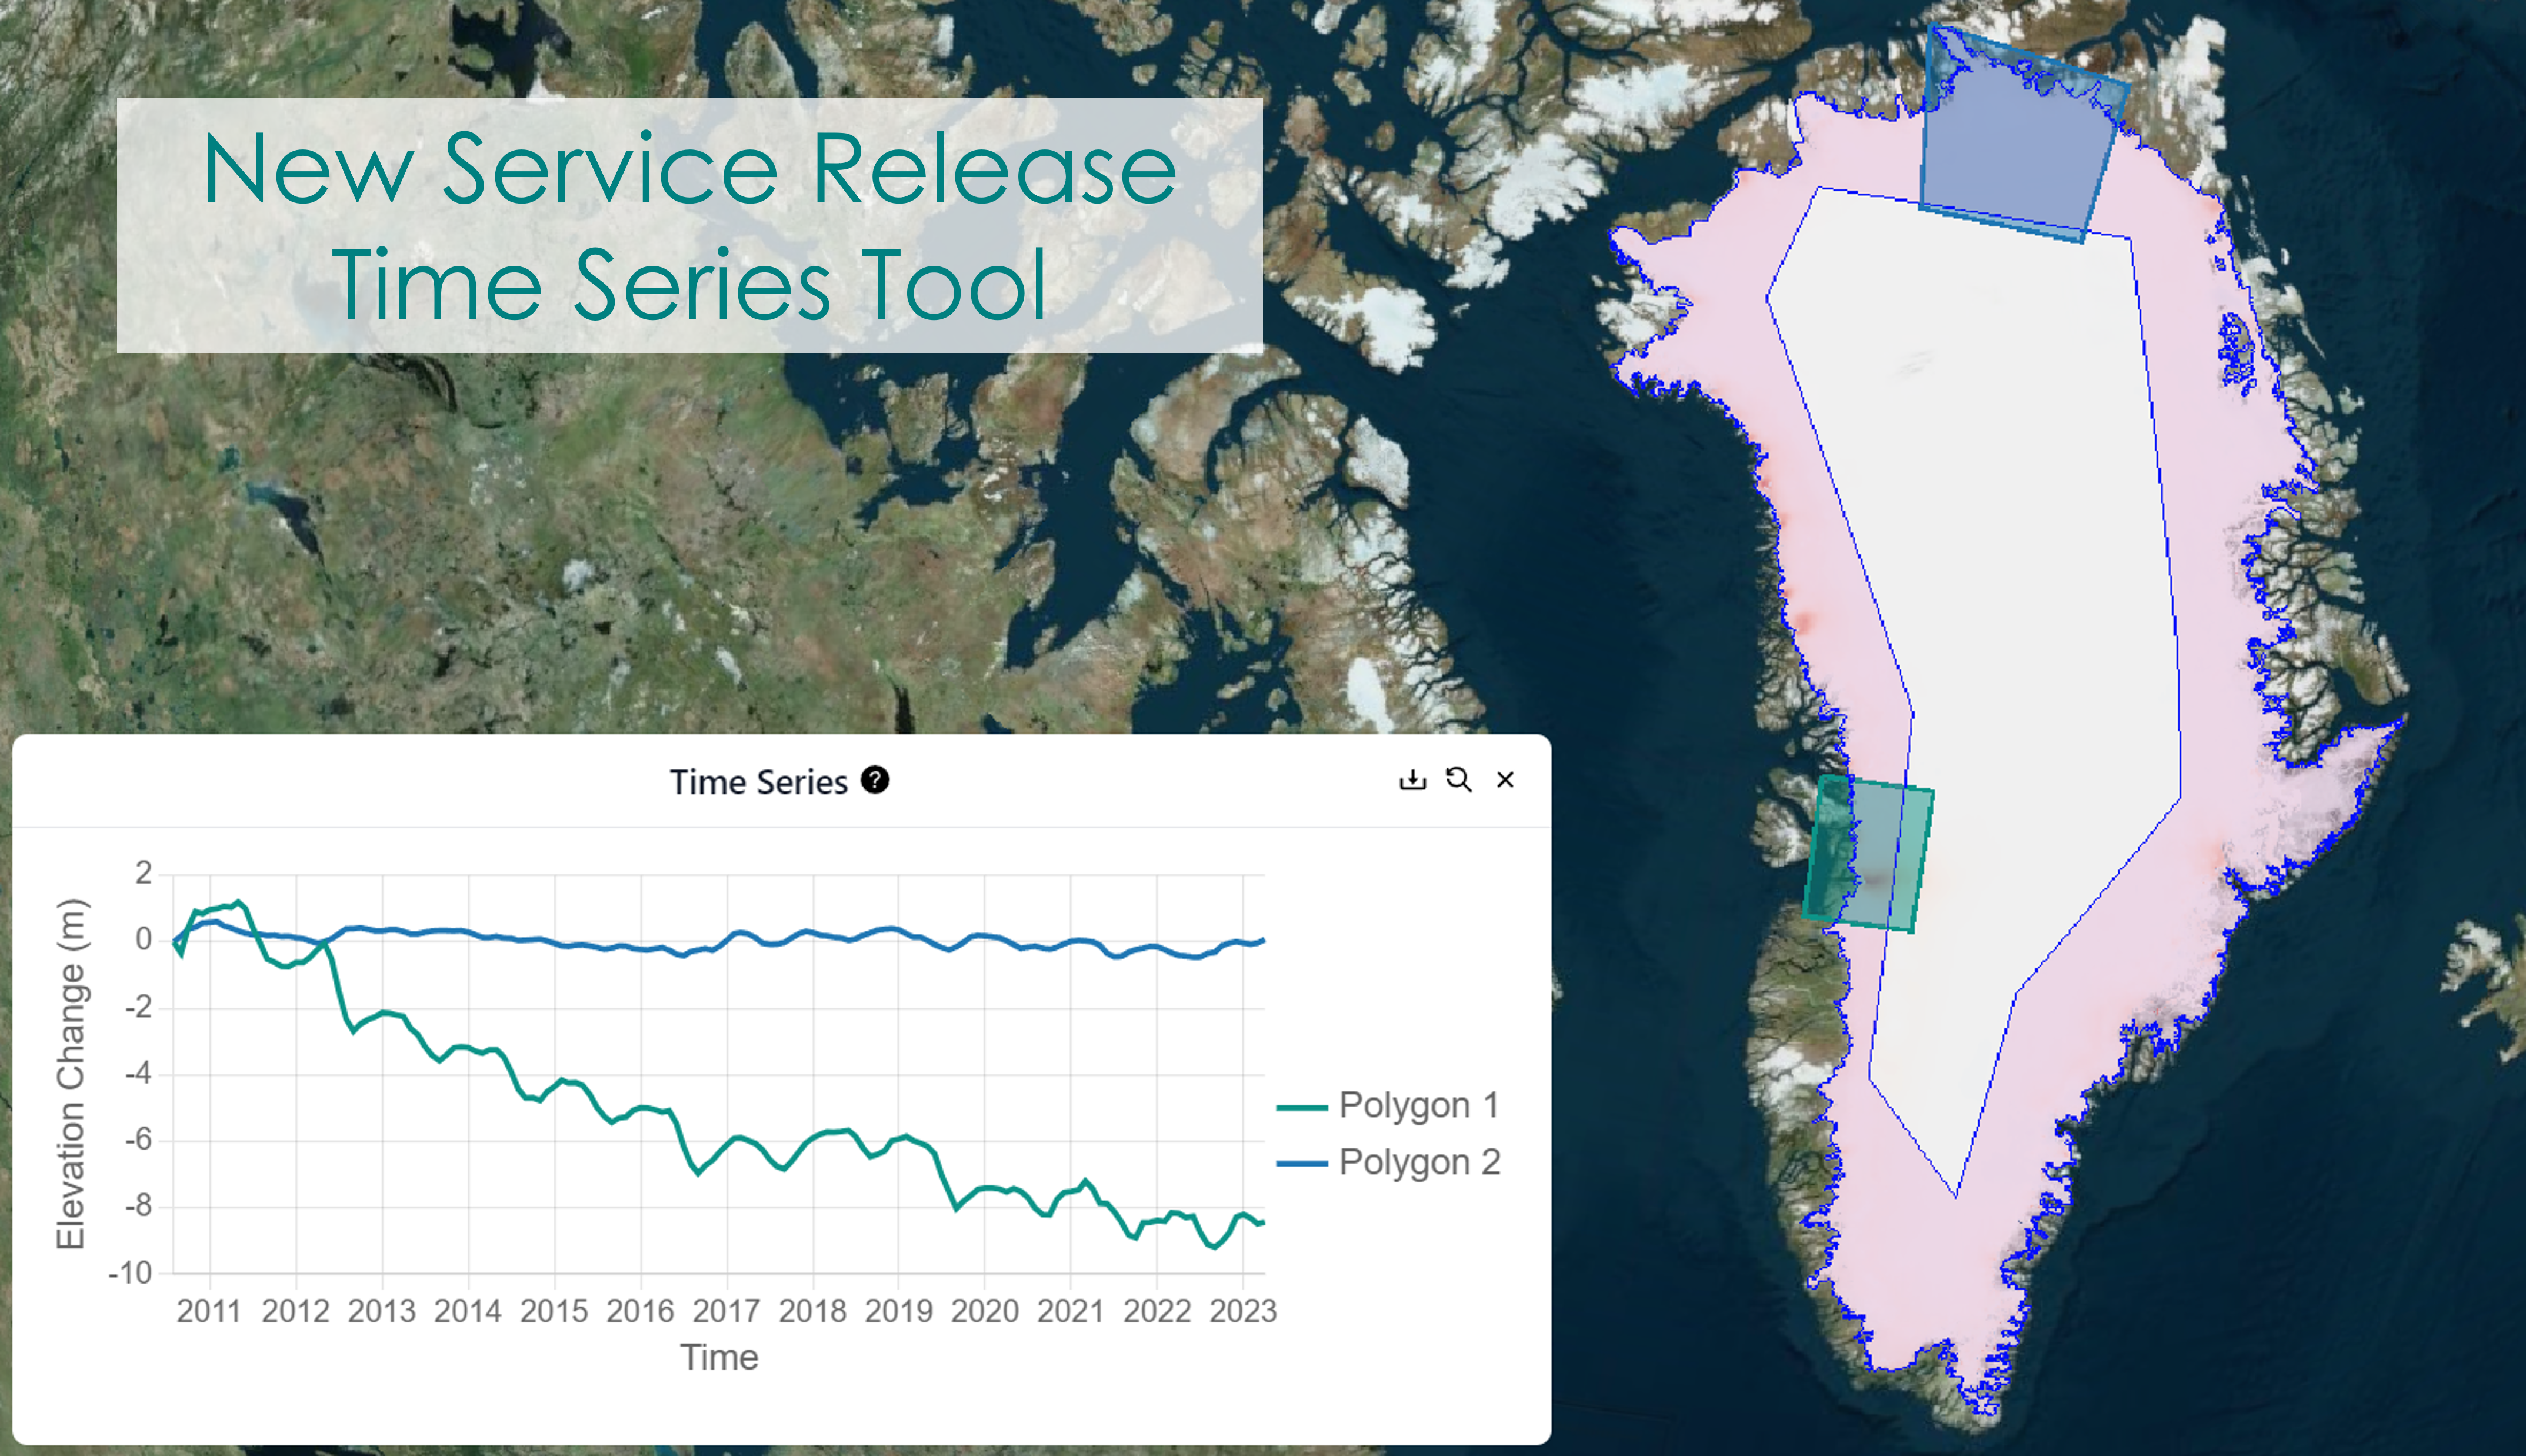 You are currently viewing New Service Release: Time Series Tool for Baseline 2 of the CryoTEMPO-EOLIS Products